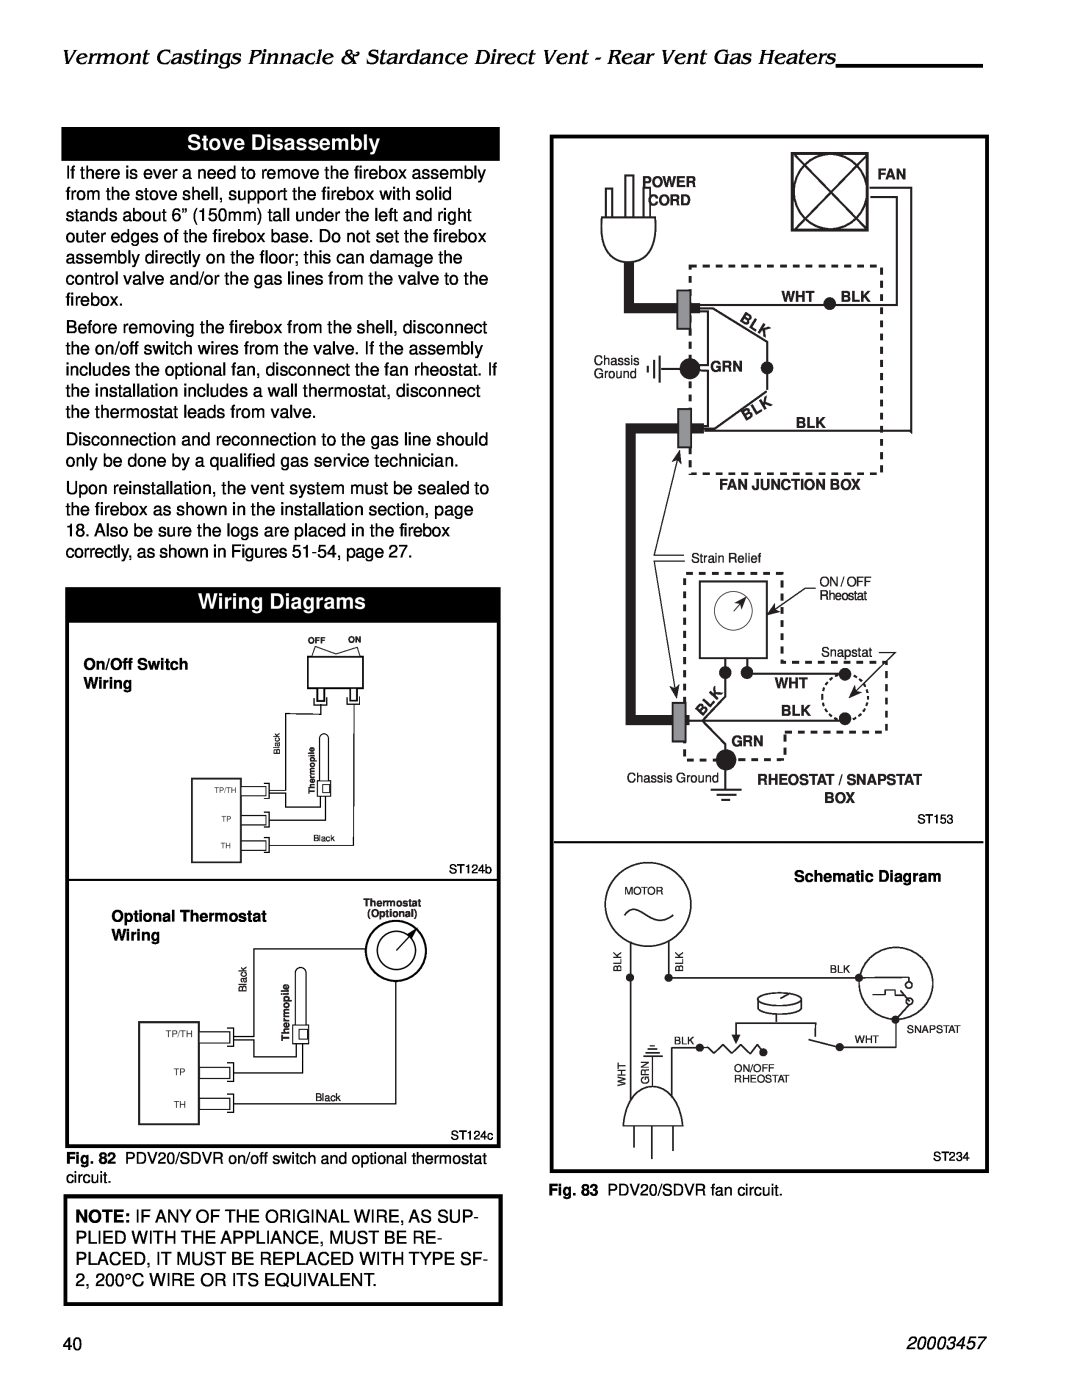 Vermont Casting 2996, 2950, 2951, 2998, 2997, 2995 manual Stove Disassembly, Wiring Diagrams, 20003457 